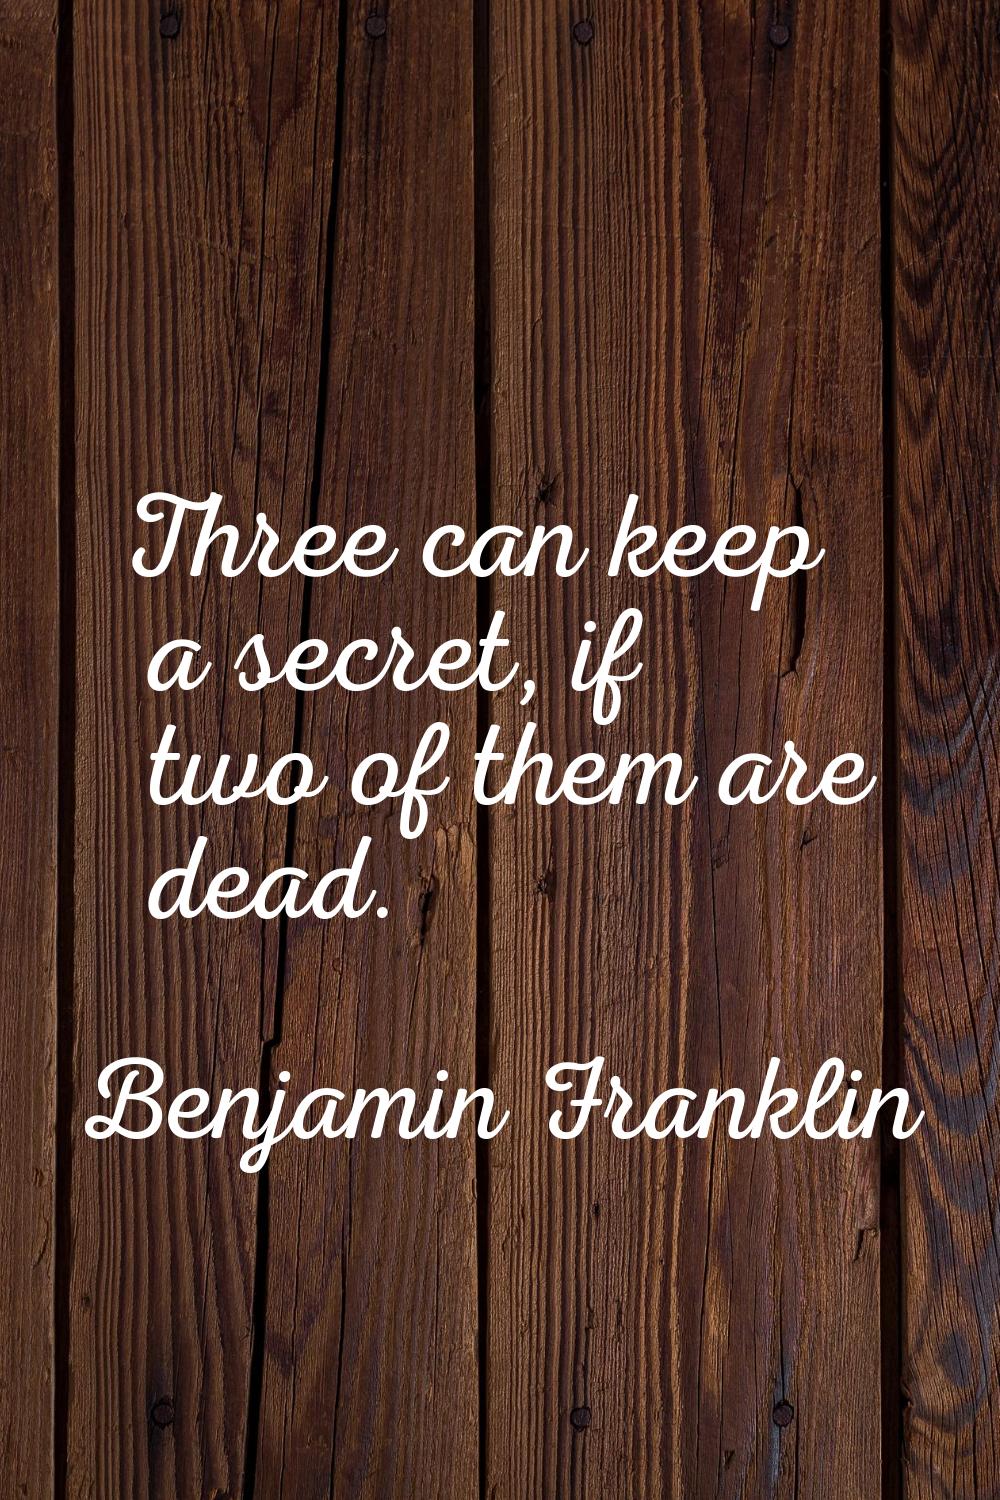 Three can keep a secret, if two of them are dead.